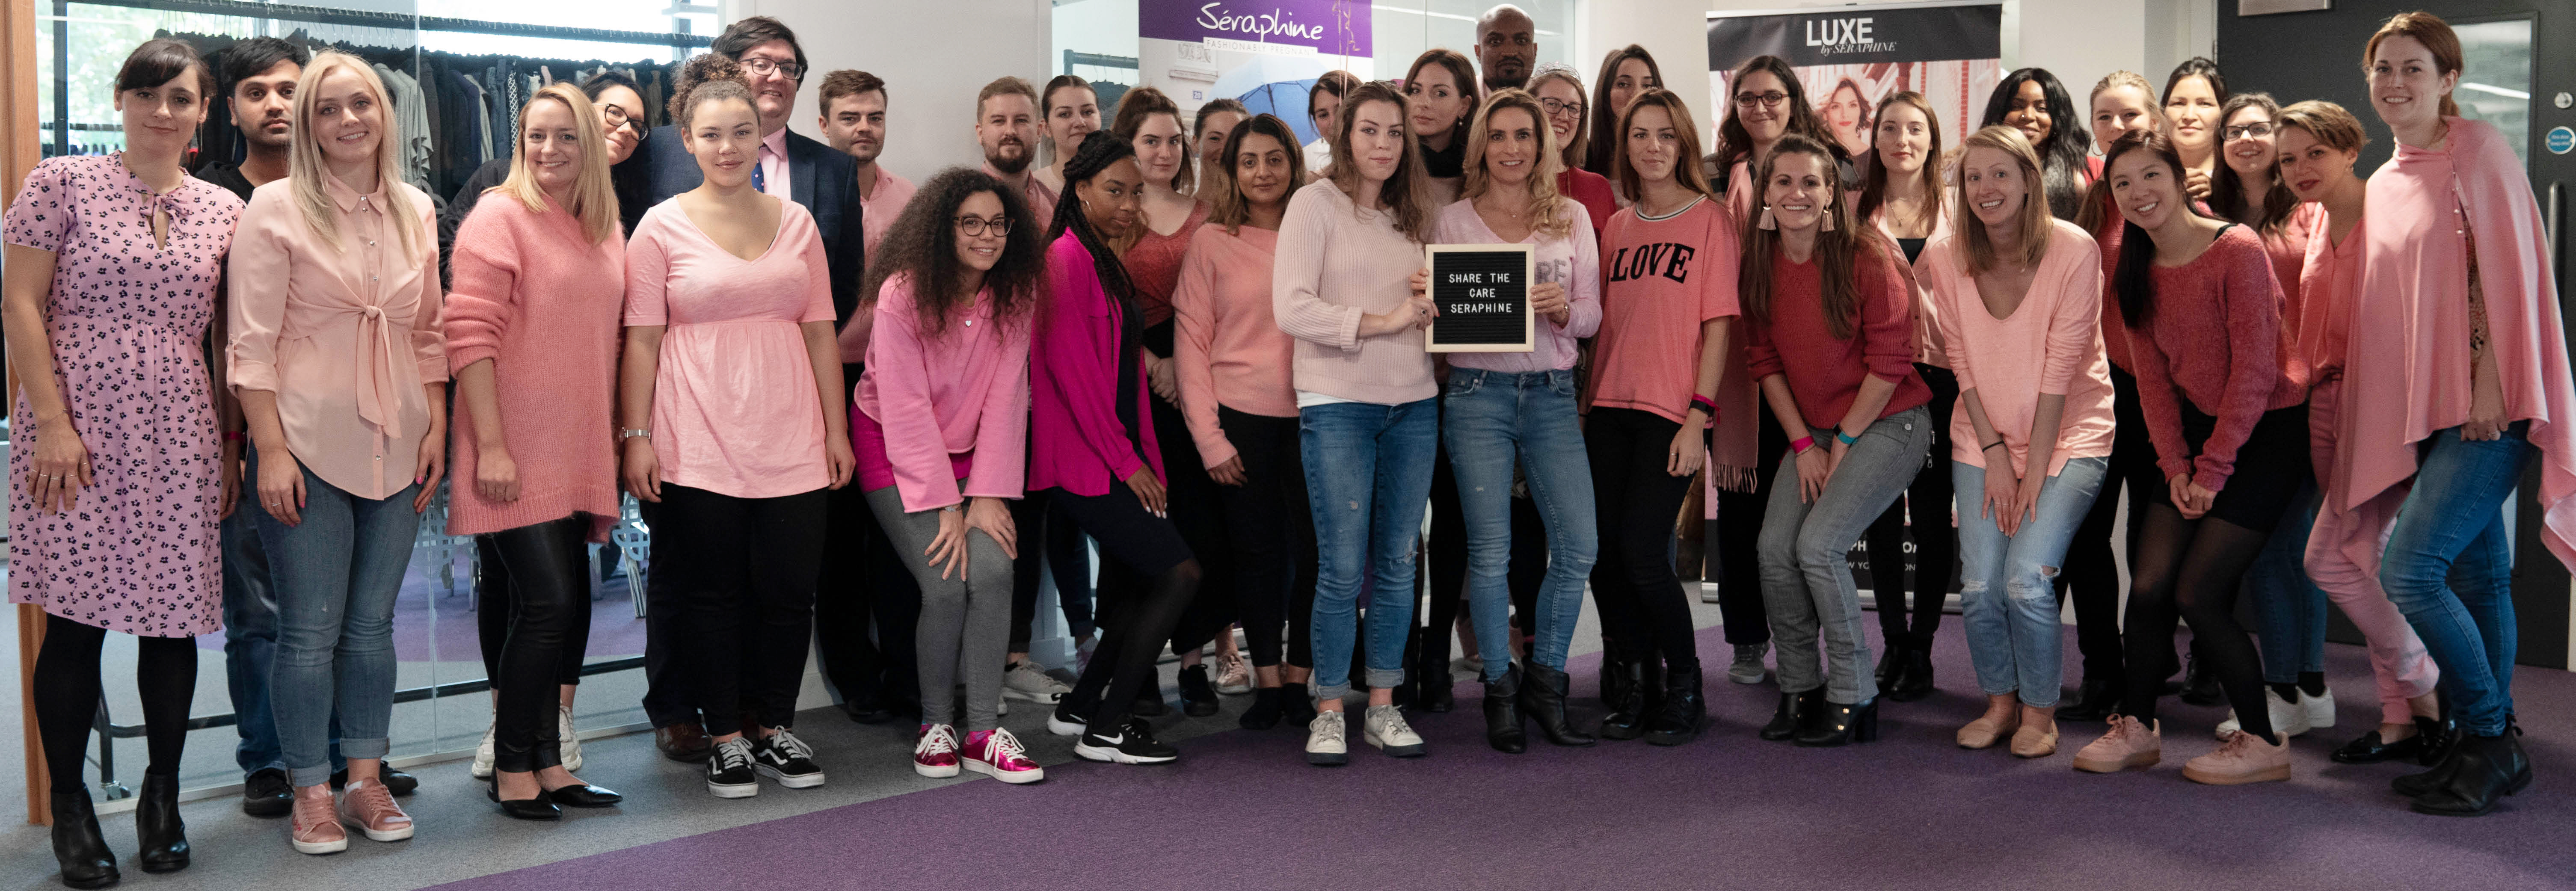 The Seraphine head office wear pink for charity